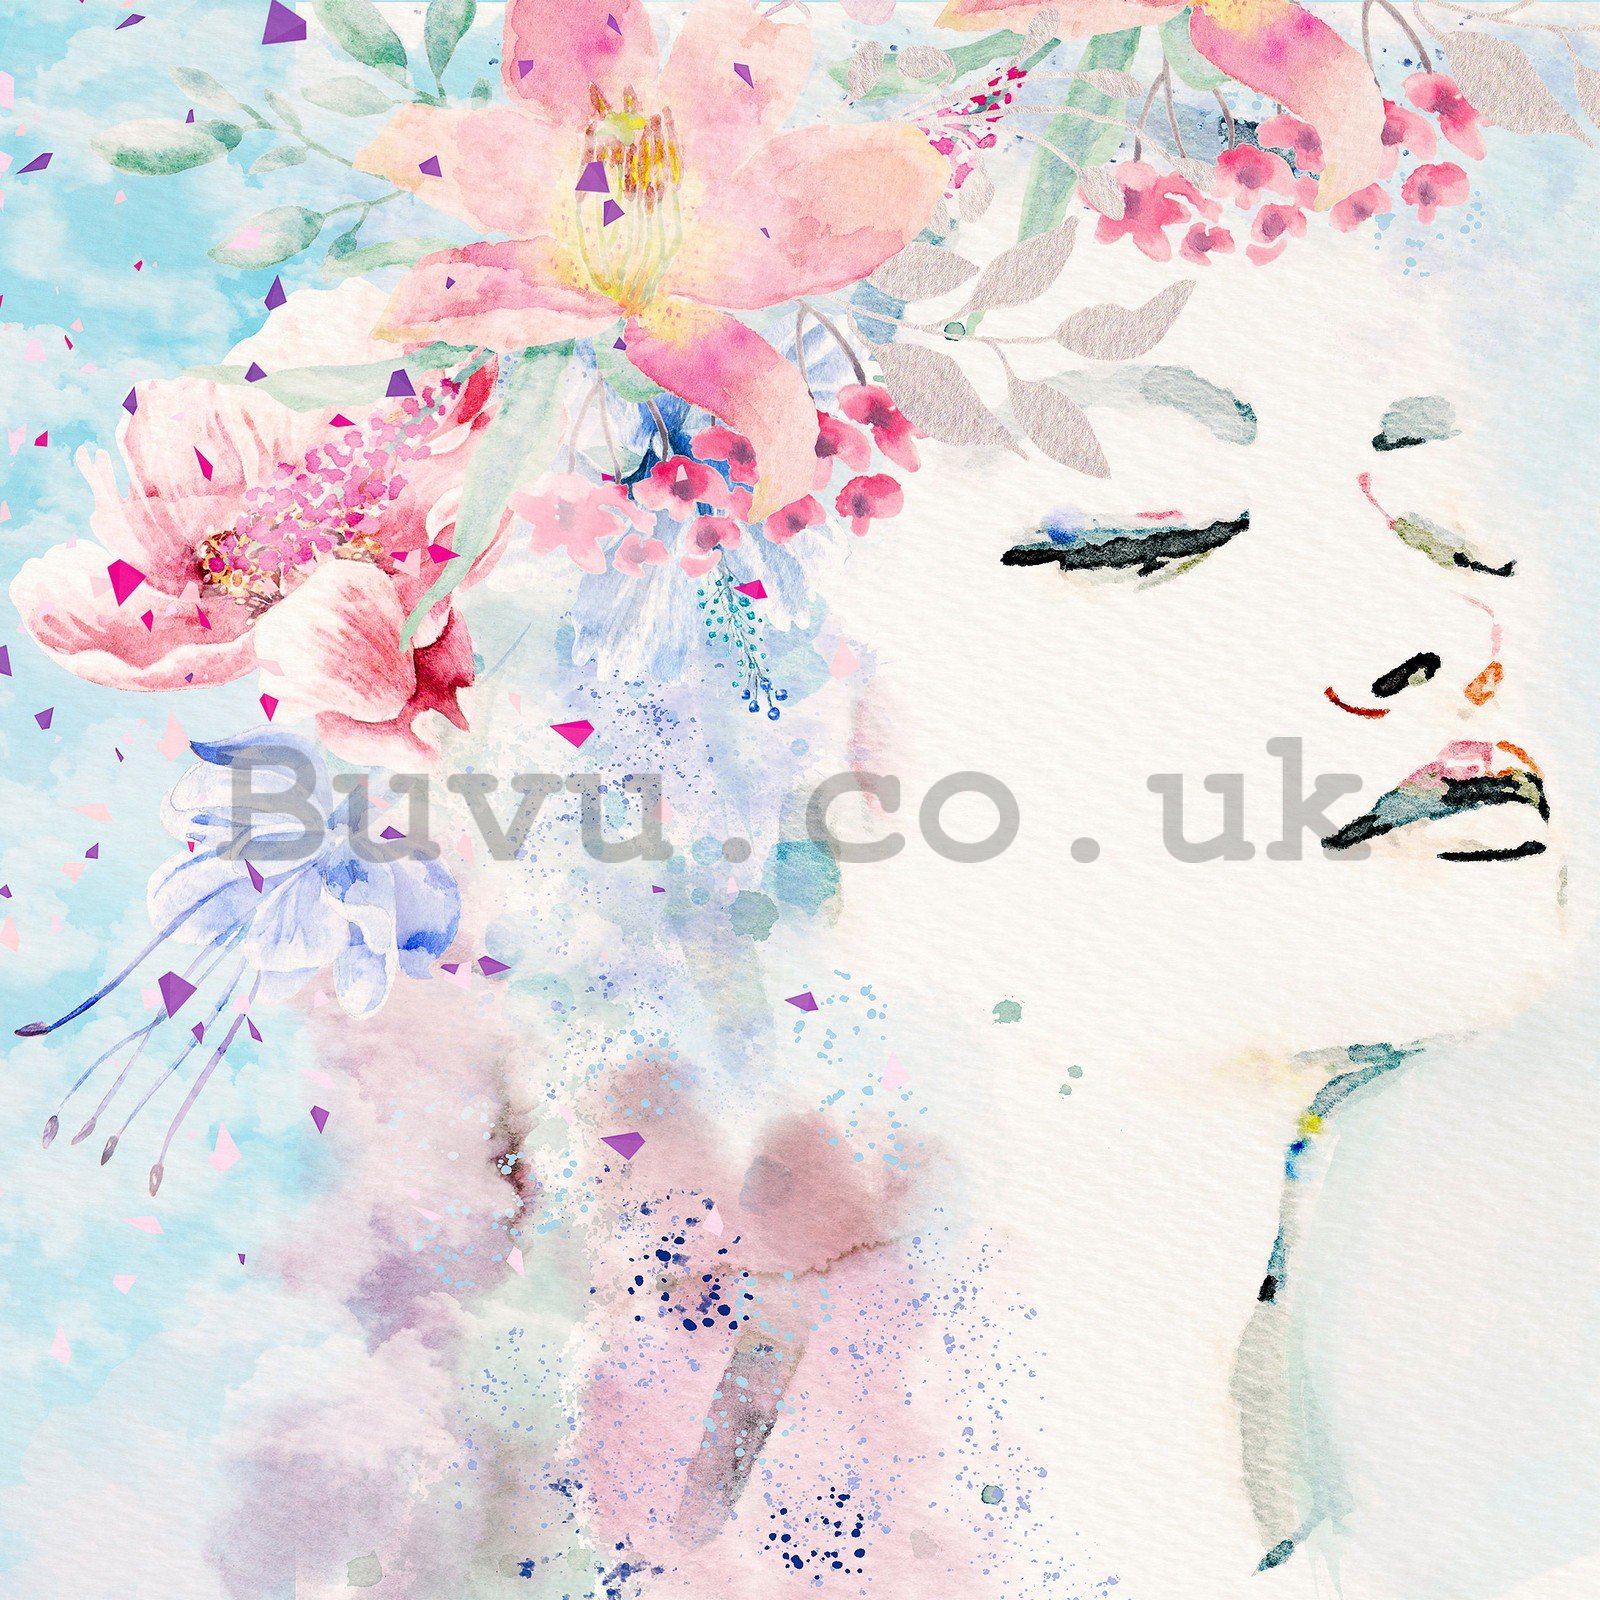 Wall mural vlies: Woman with flowers - 254x184 cm